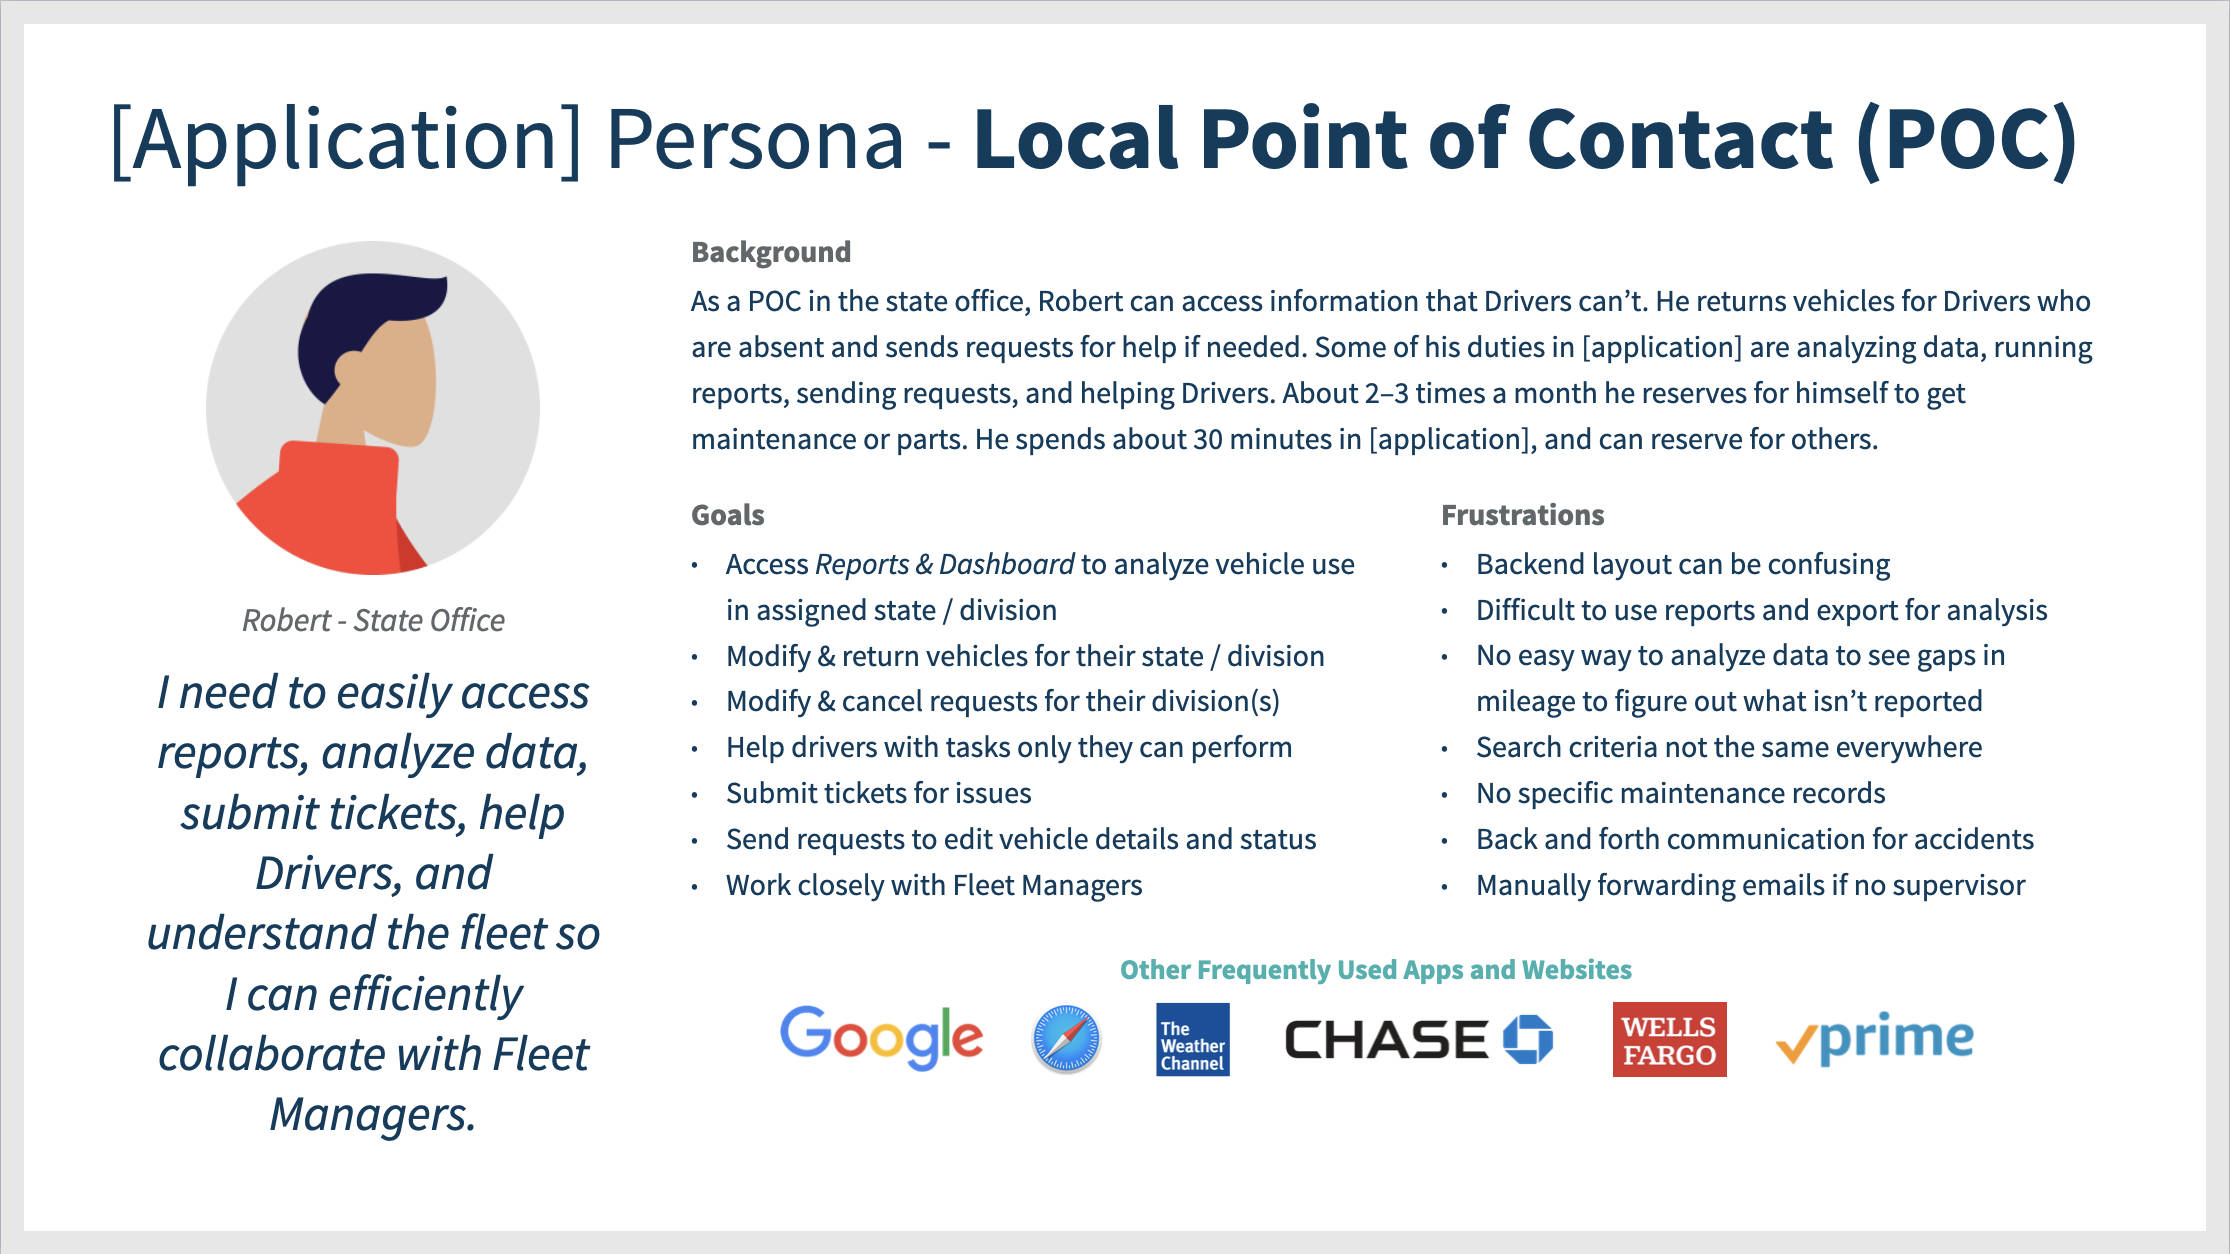 Persona: Local Point of Contact